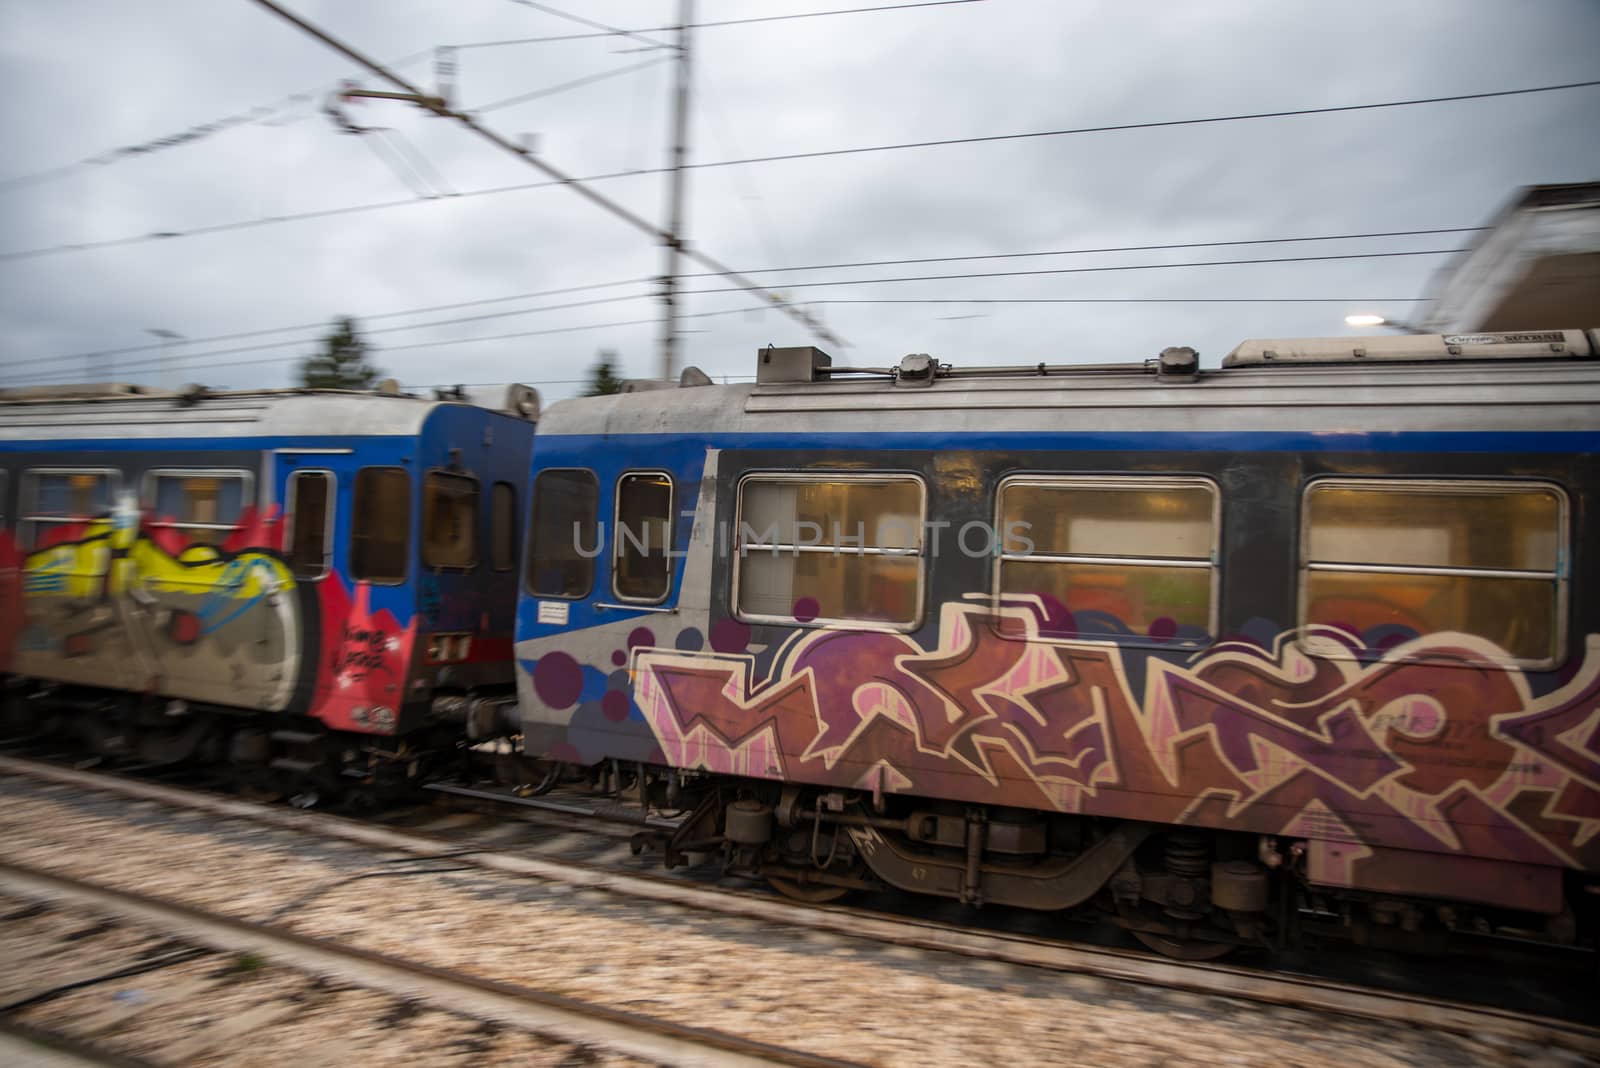 teni,italy may 28 2020 :trains panning at the station at speed with people inside and colored by graffiti